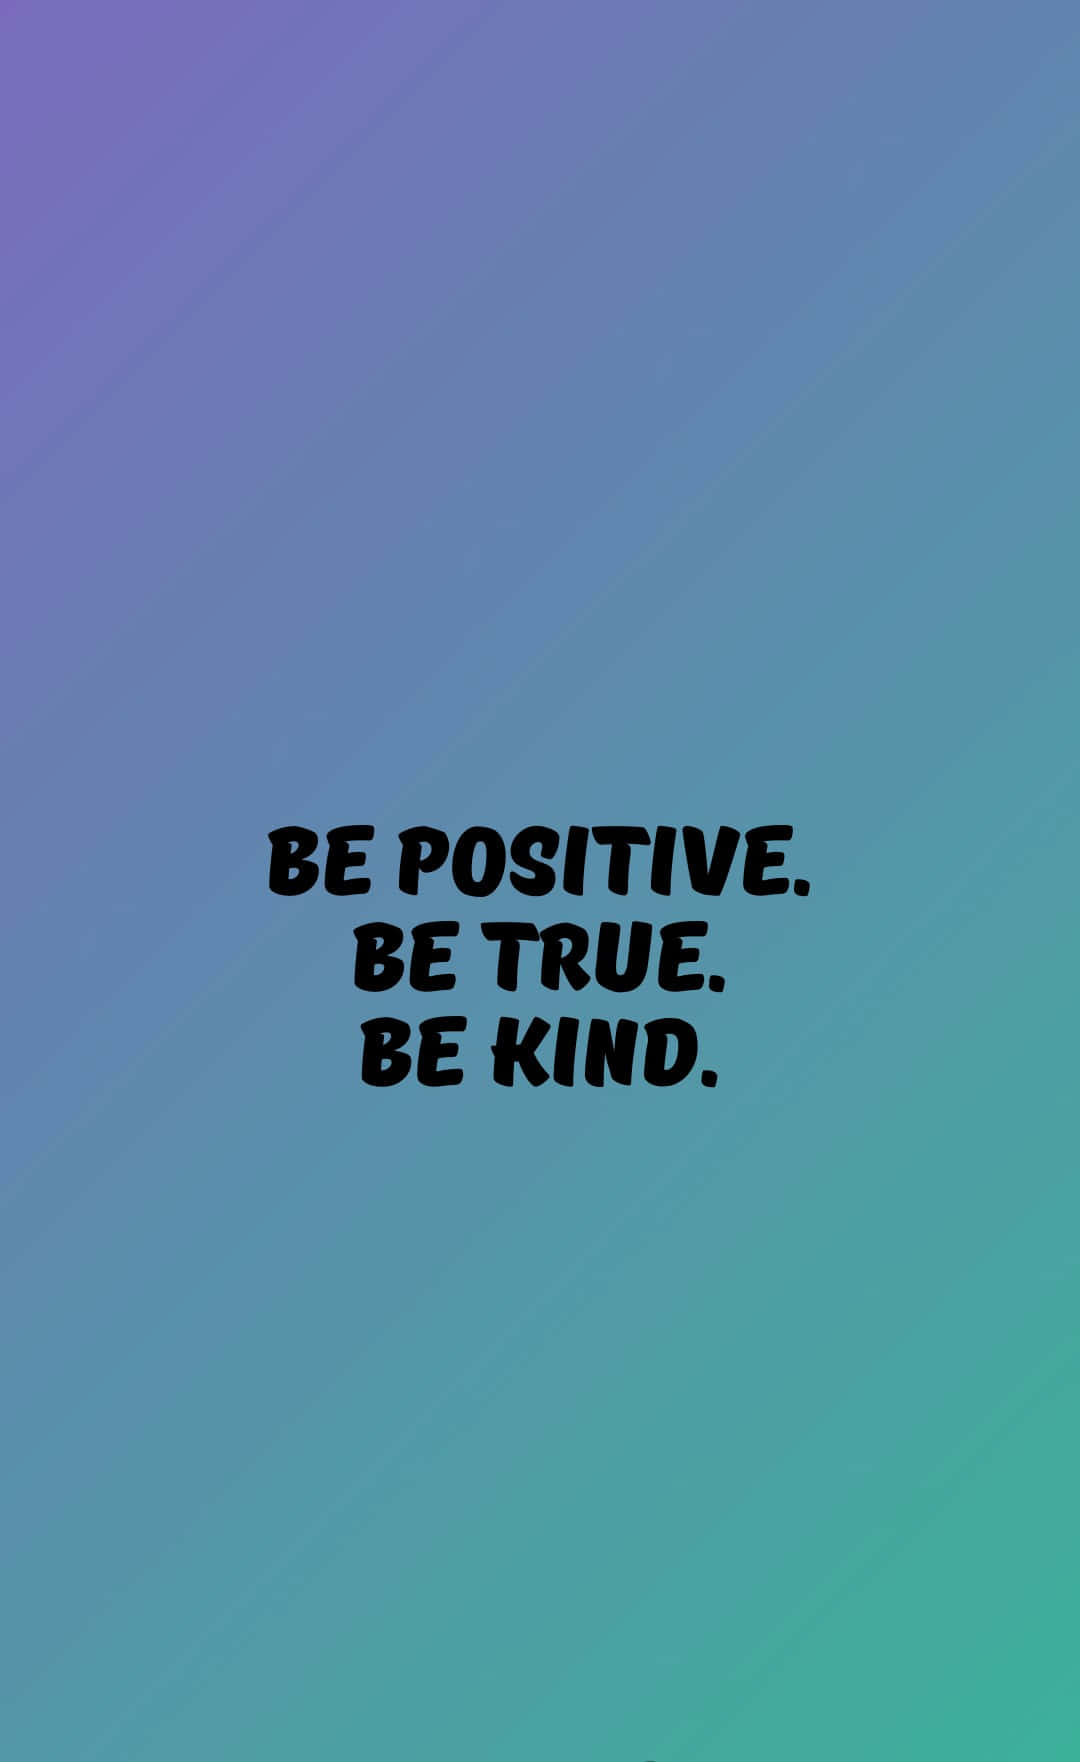 Be Positive, Be True, Be Kind Motivational Quote Wallpaper